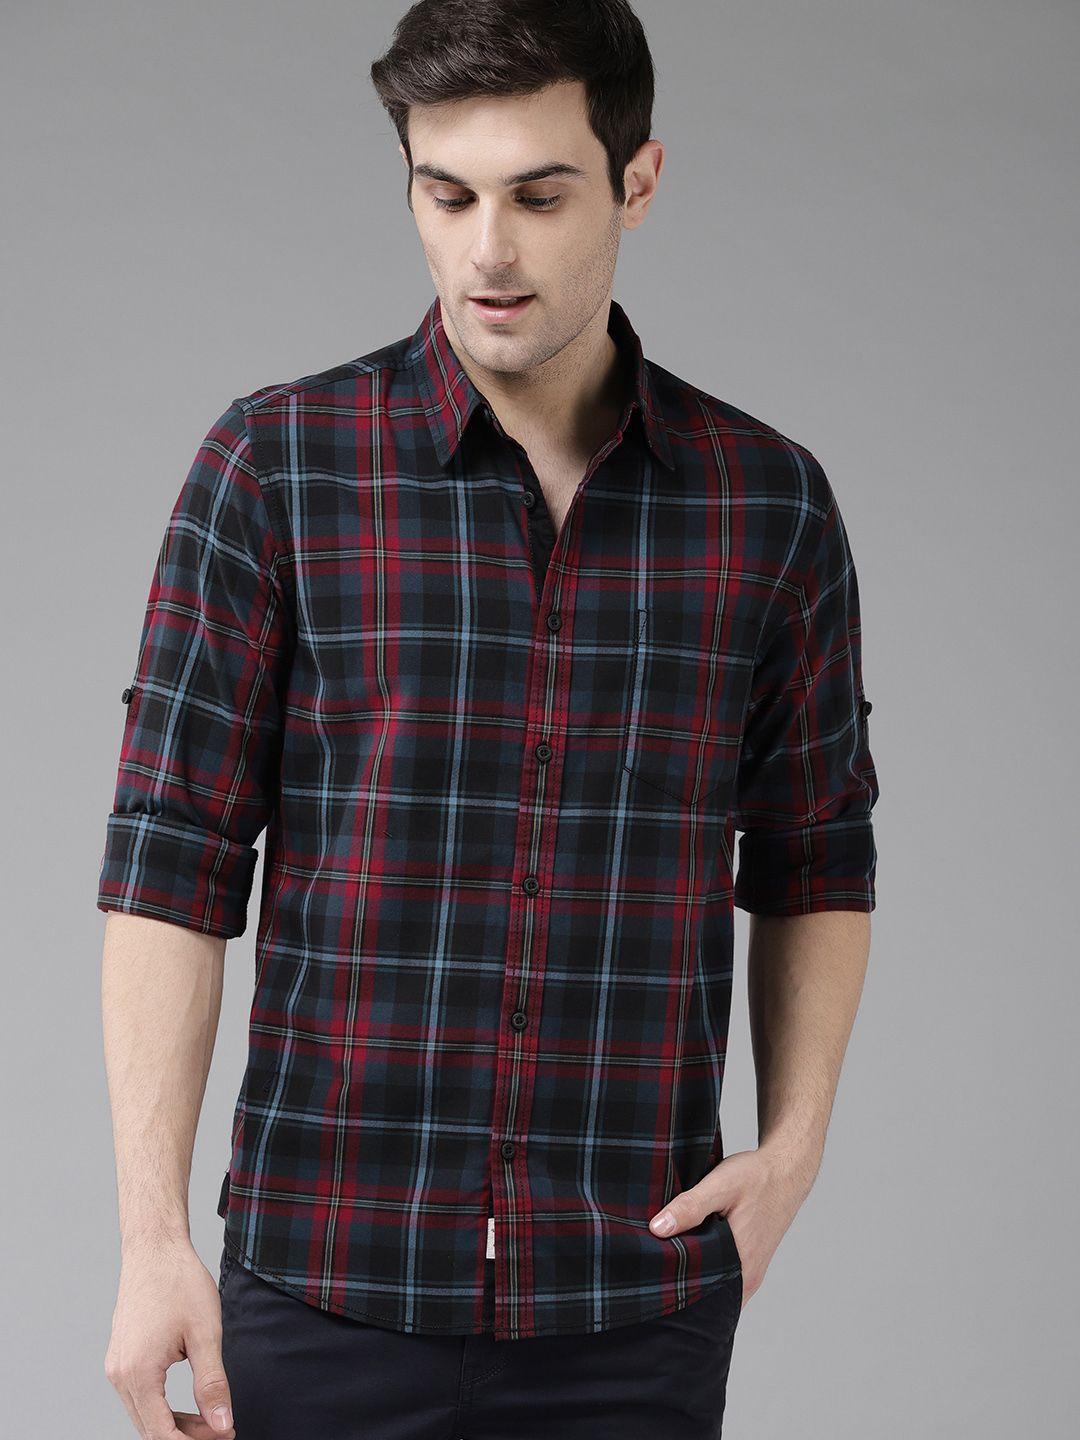 the-roadster-lifestyle-co-men-maroon-&-navy-blue-regular-fit-checked-sustainable-casual-shirt